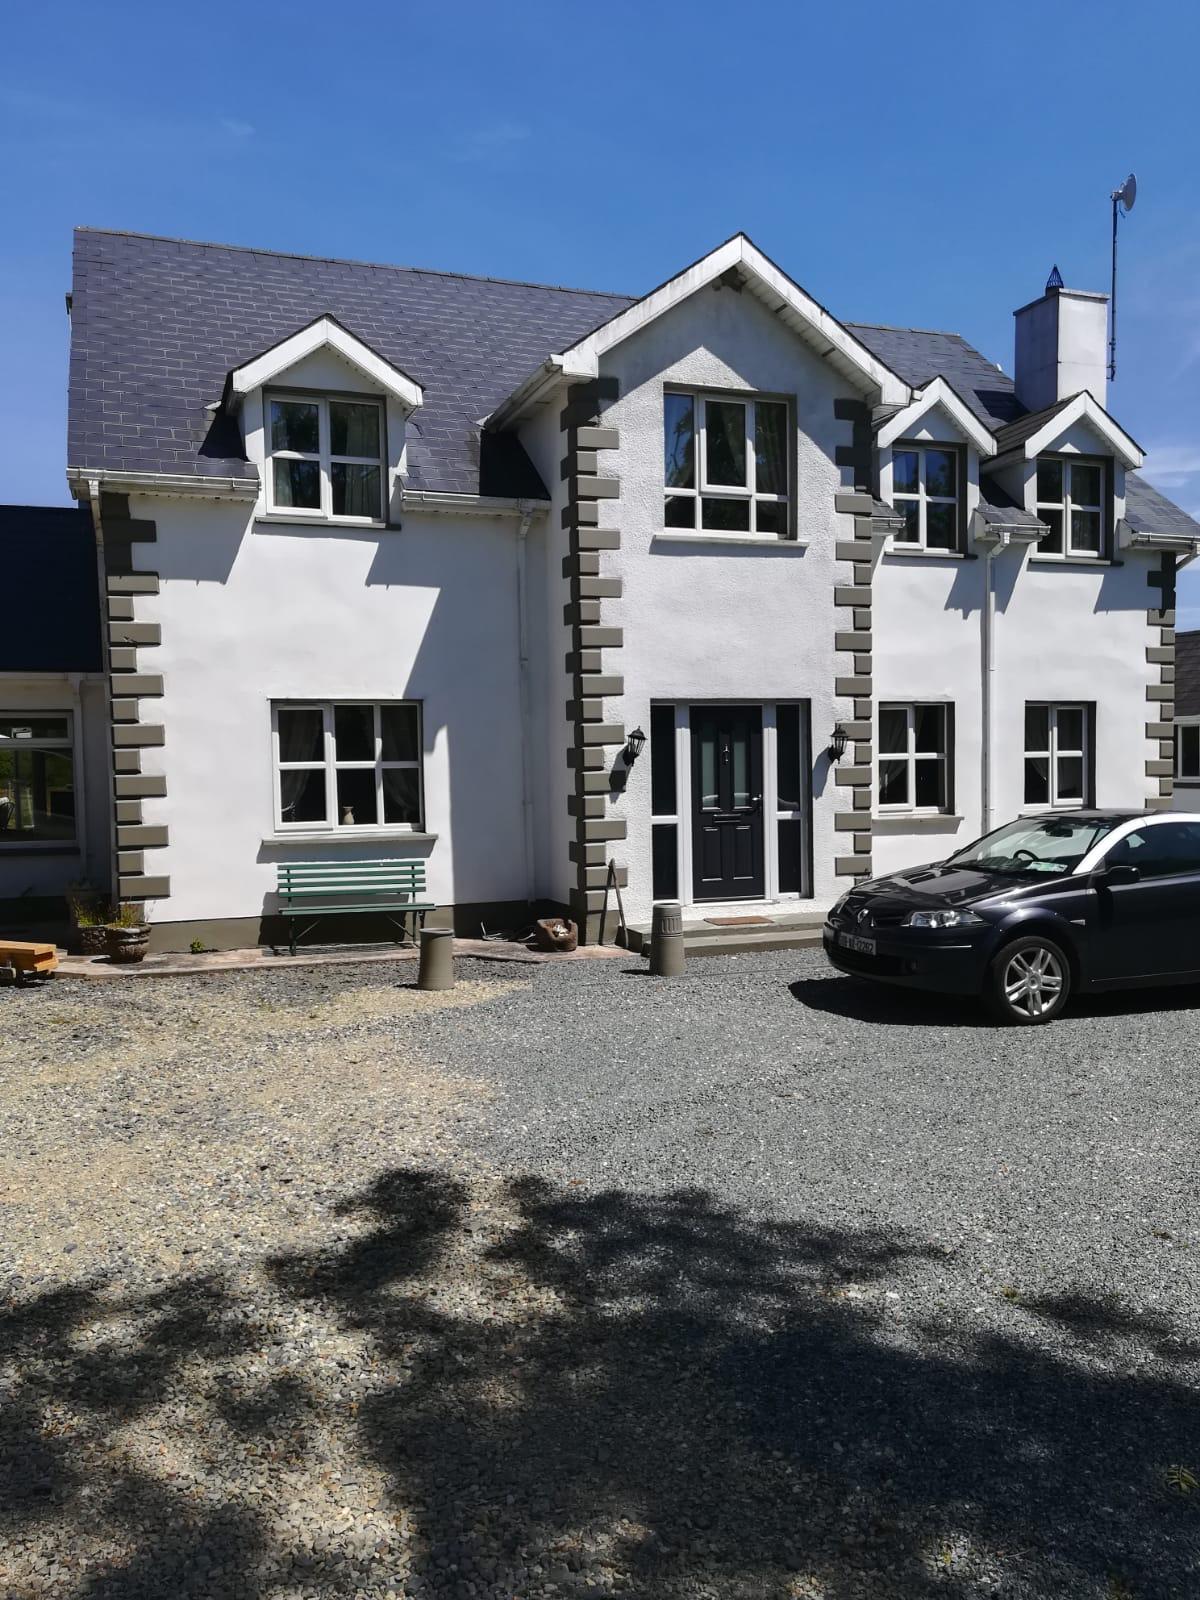 Picture of Home For Sale in Wexford, Wexford, Ireland